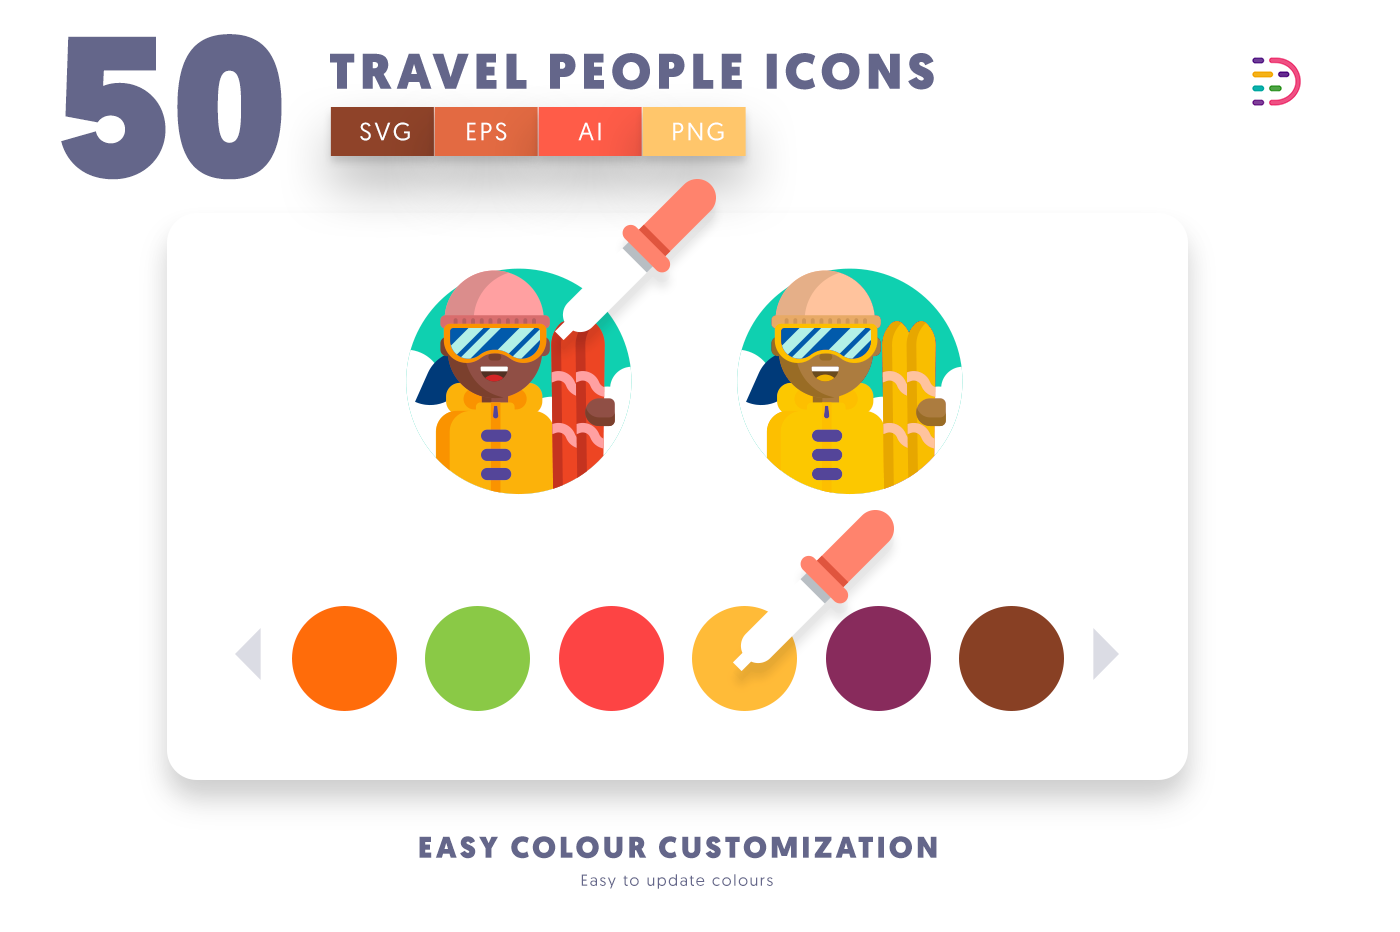 EPS, SVG, PNG full vector 50 Travel People Icons